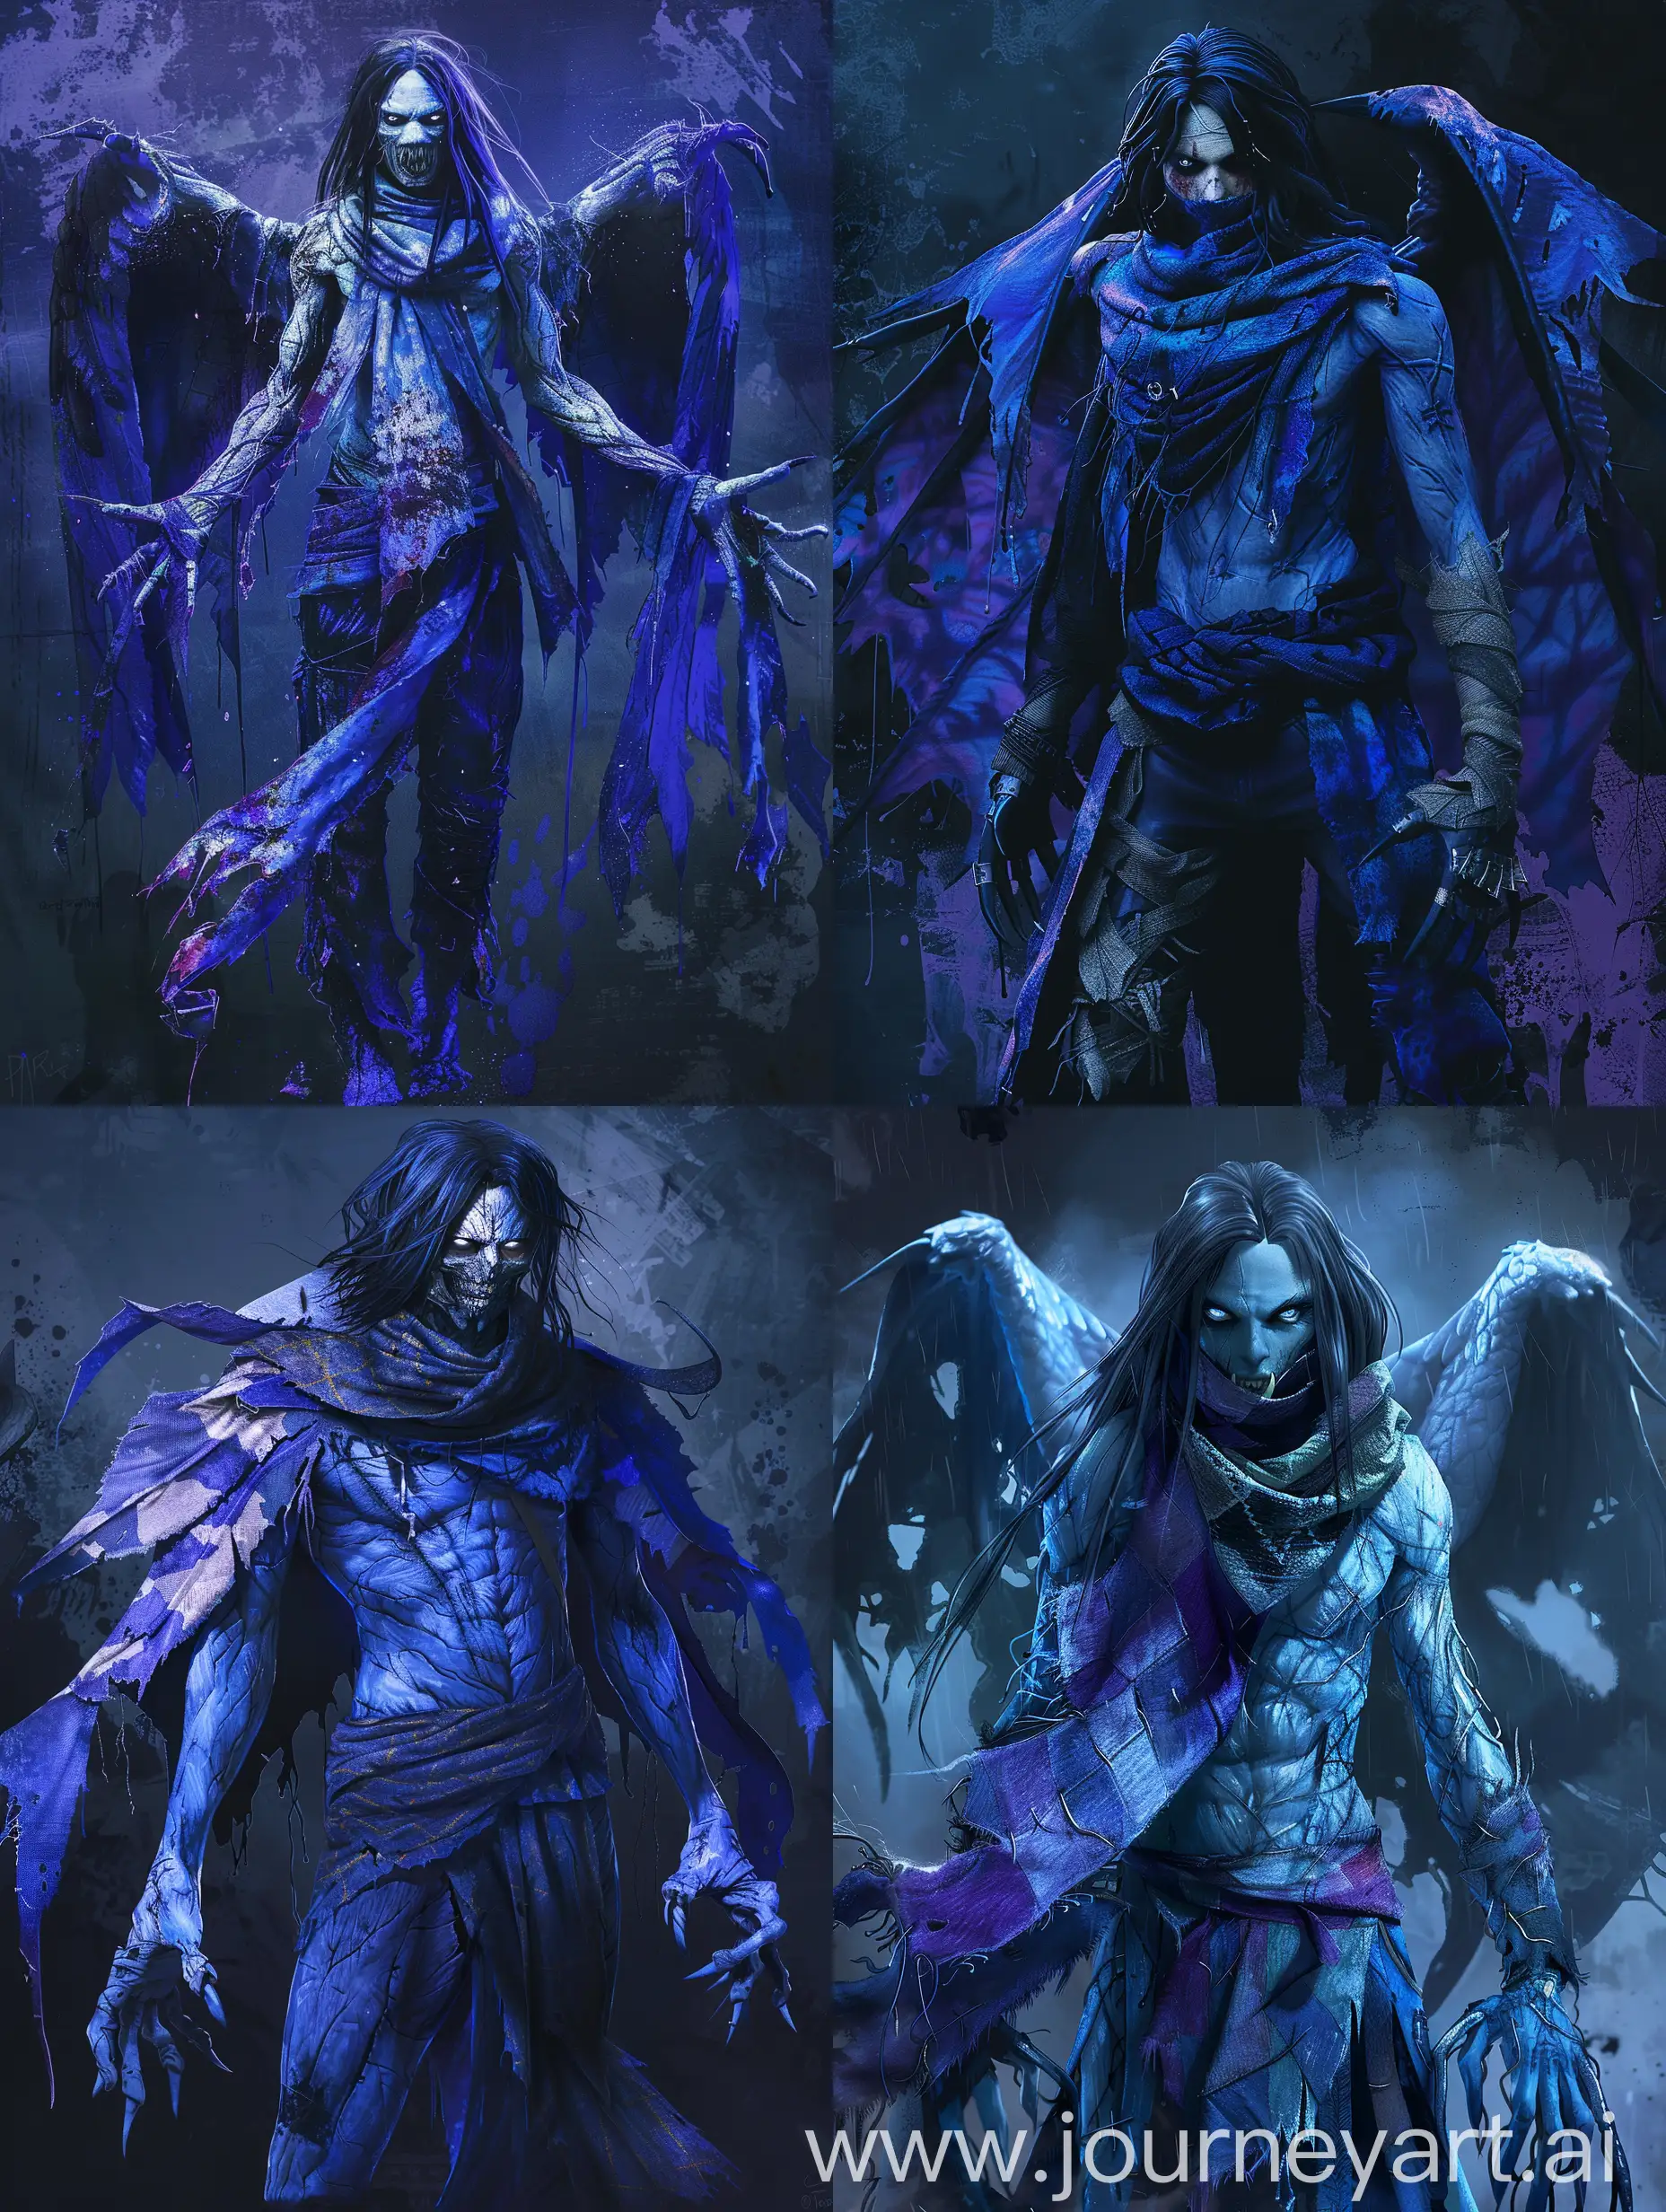 Raziel, Legacy of Kain , full-length blue withered skinny body, medium-long black hair, rough skin structure, scarf covers mouth, bright white eyes, fangs, claws, ragged patchwork wings, horror style, digital art in blue and purple shades, dark background, smudges, 8k